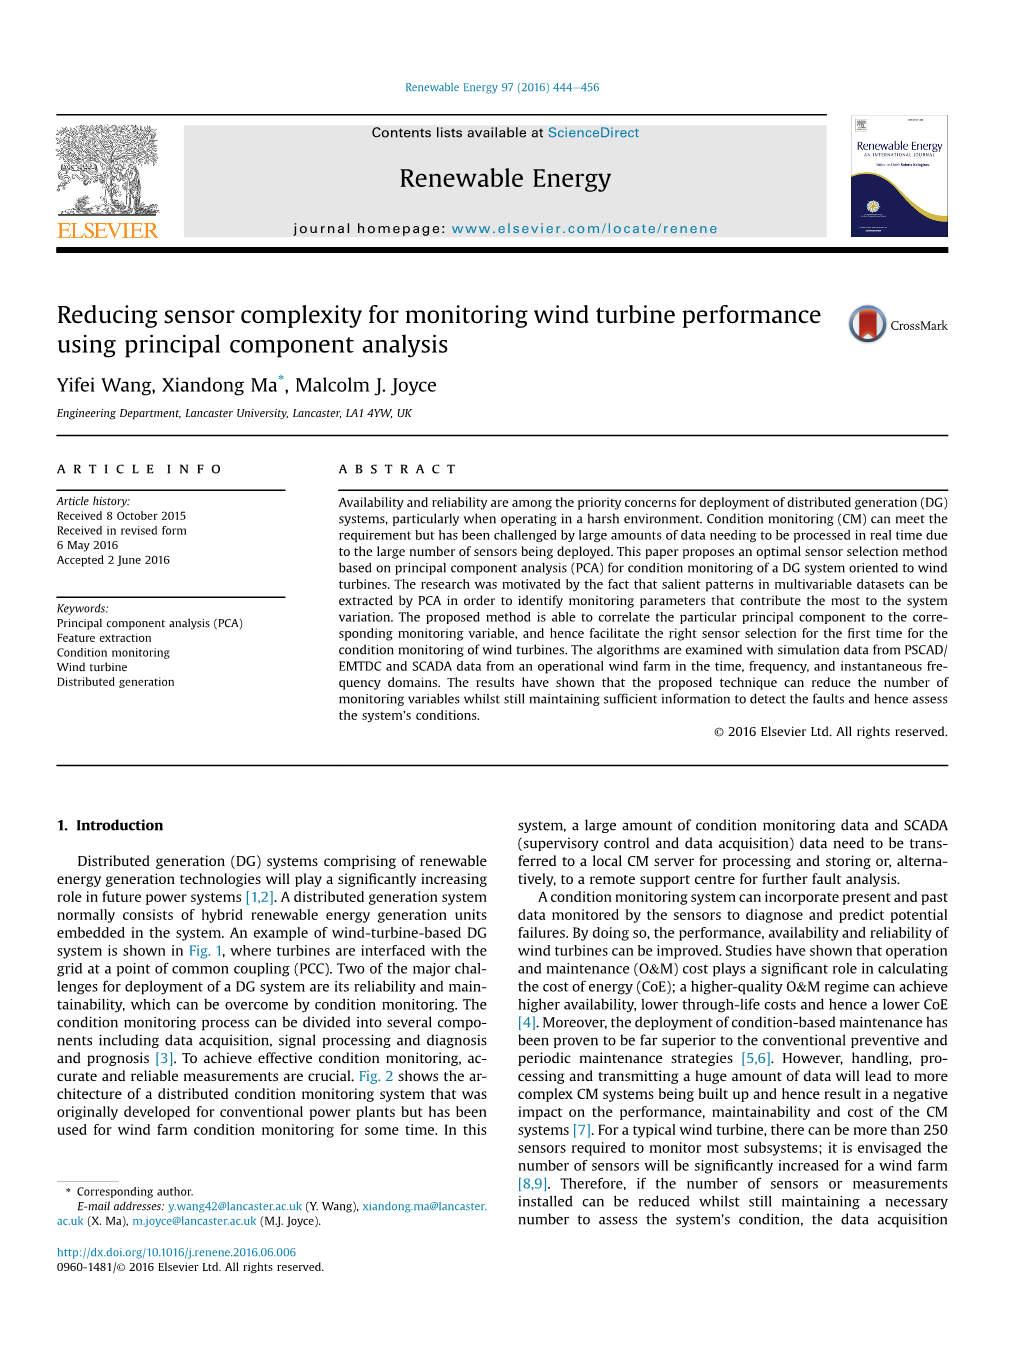 Reducing Sensor Complexity for Monitoring Wind Turbine Performance Using Principal Component Analysis